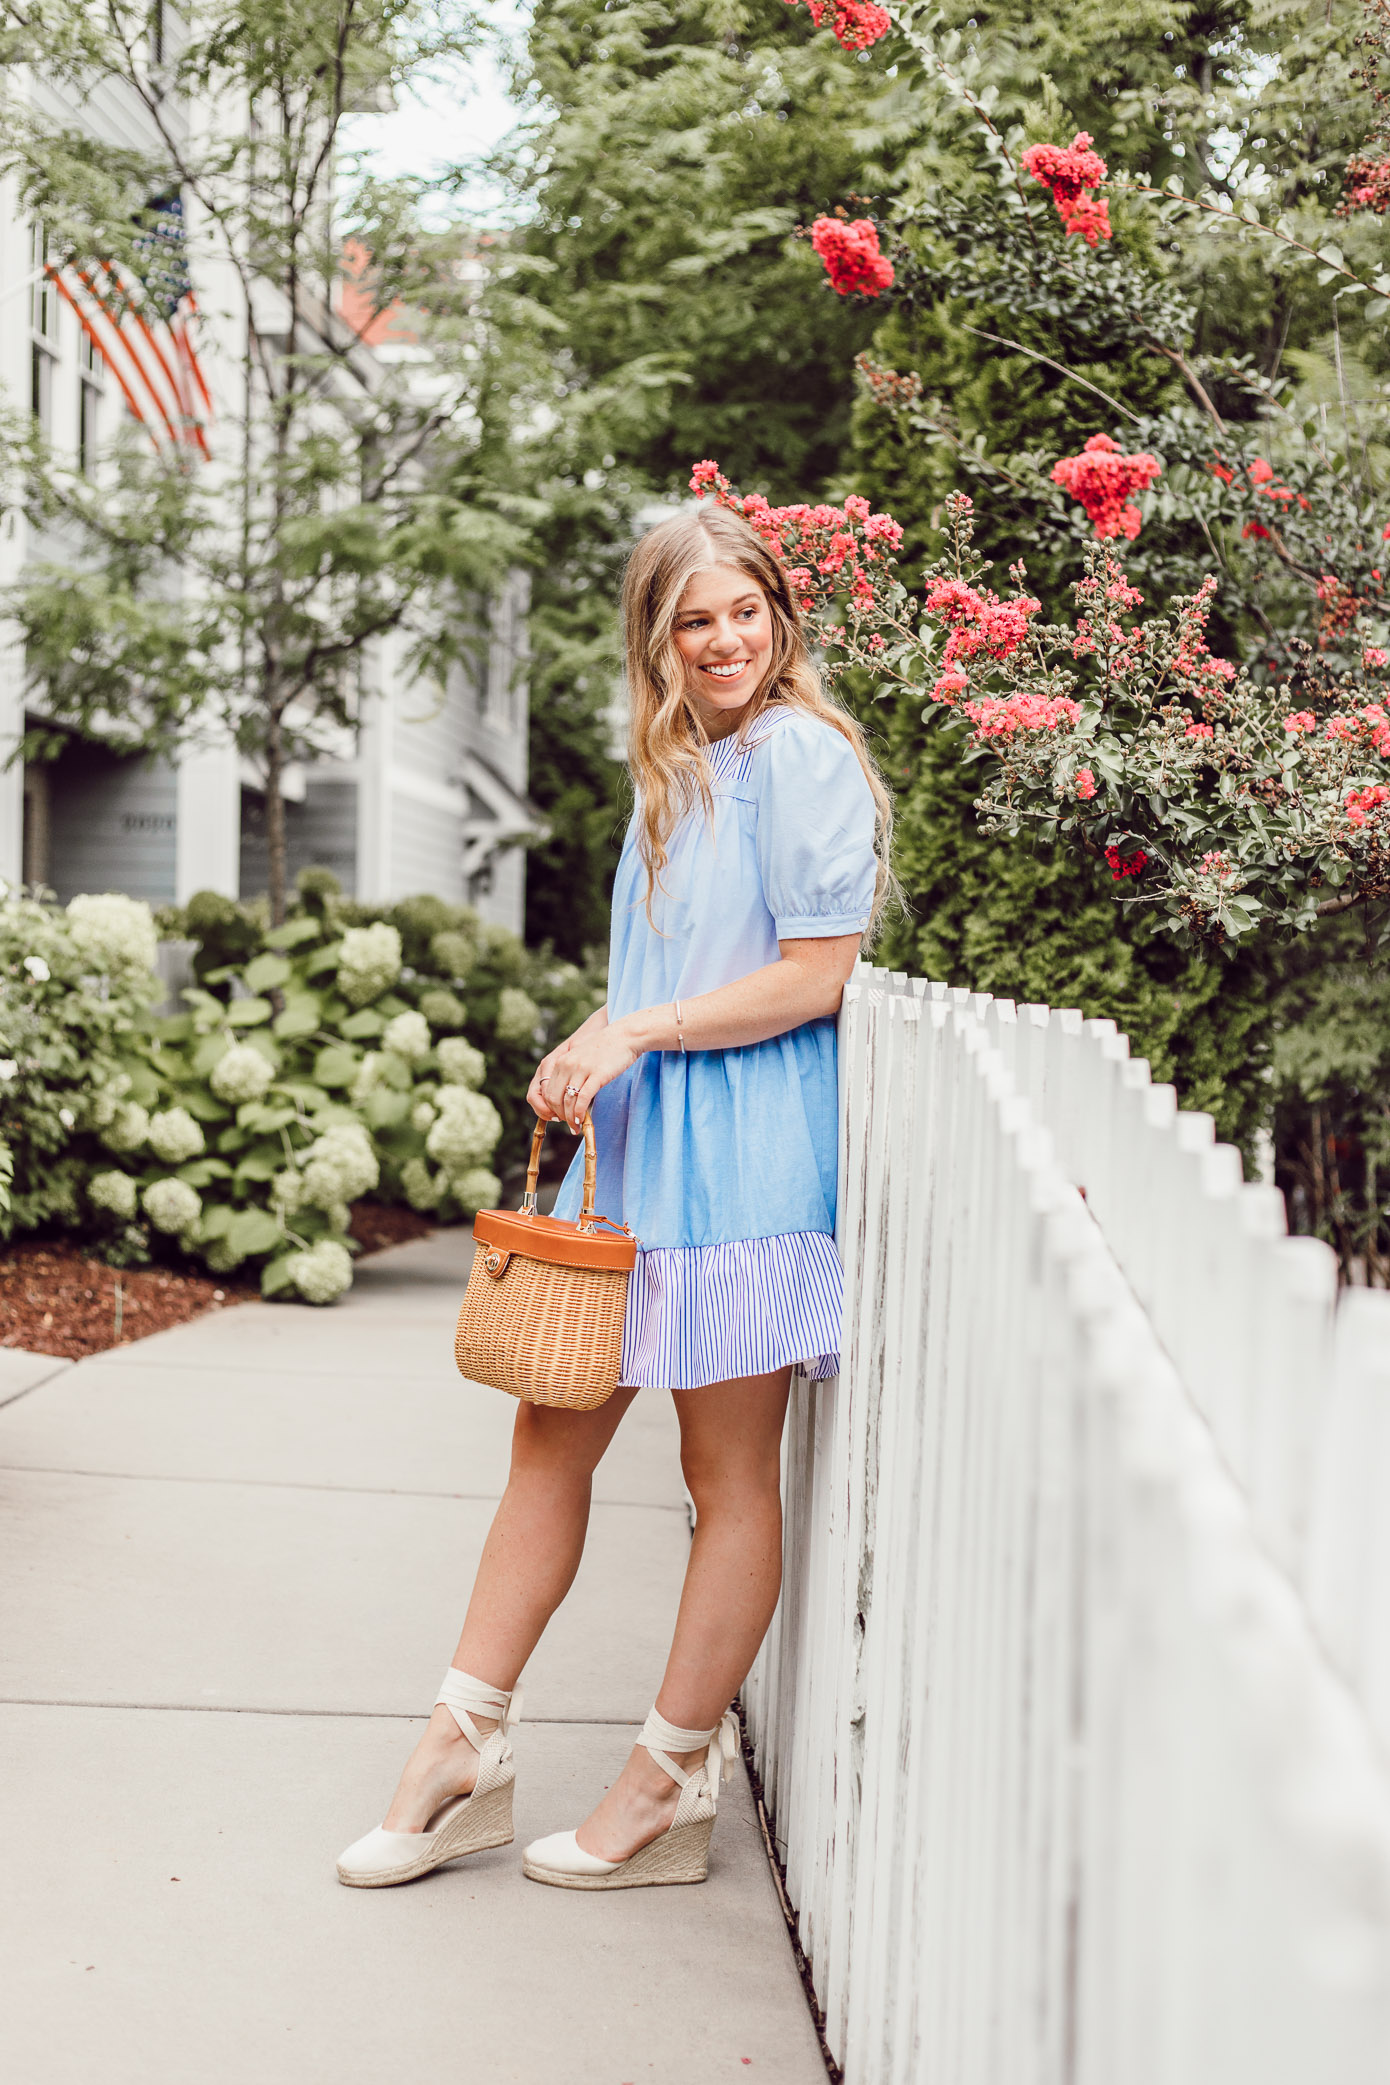 How to style a blue and white striped dress for an easy summer look, English Factory Summer Dress // Louella Reese